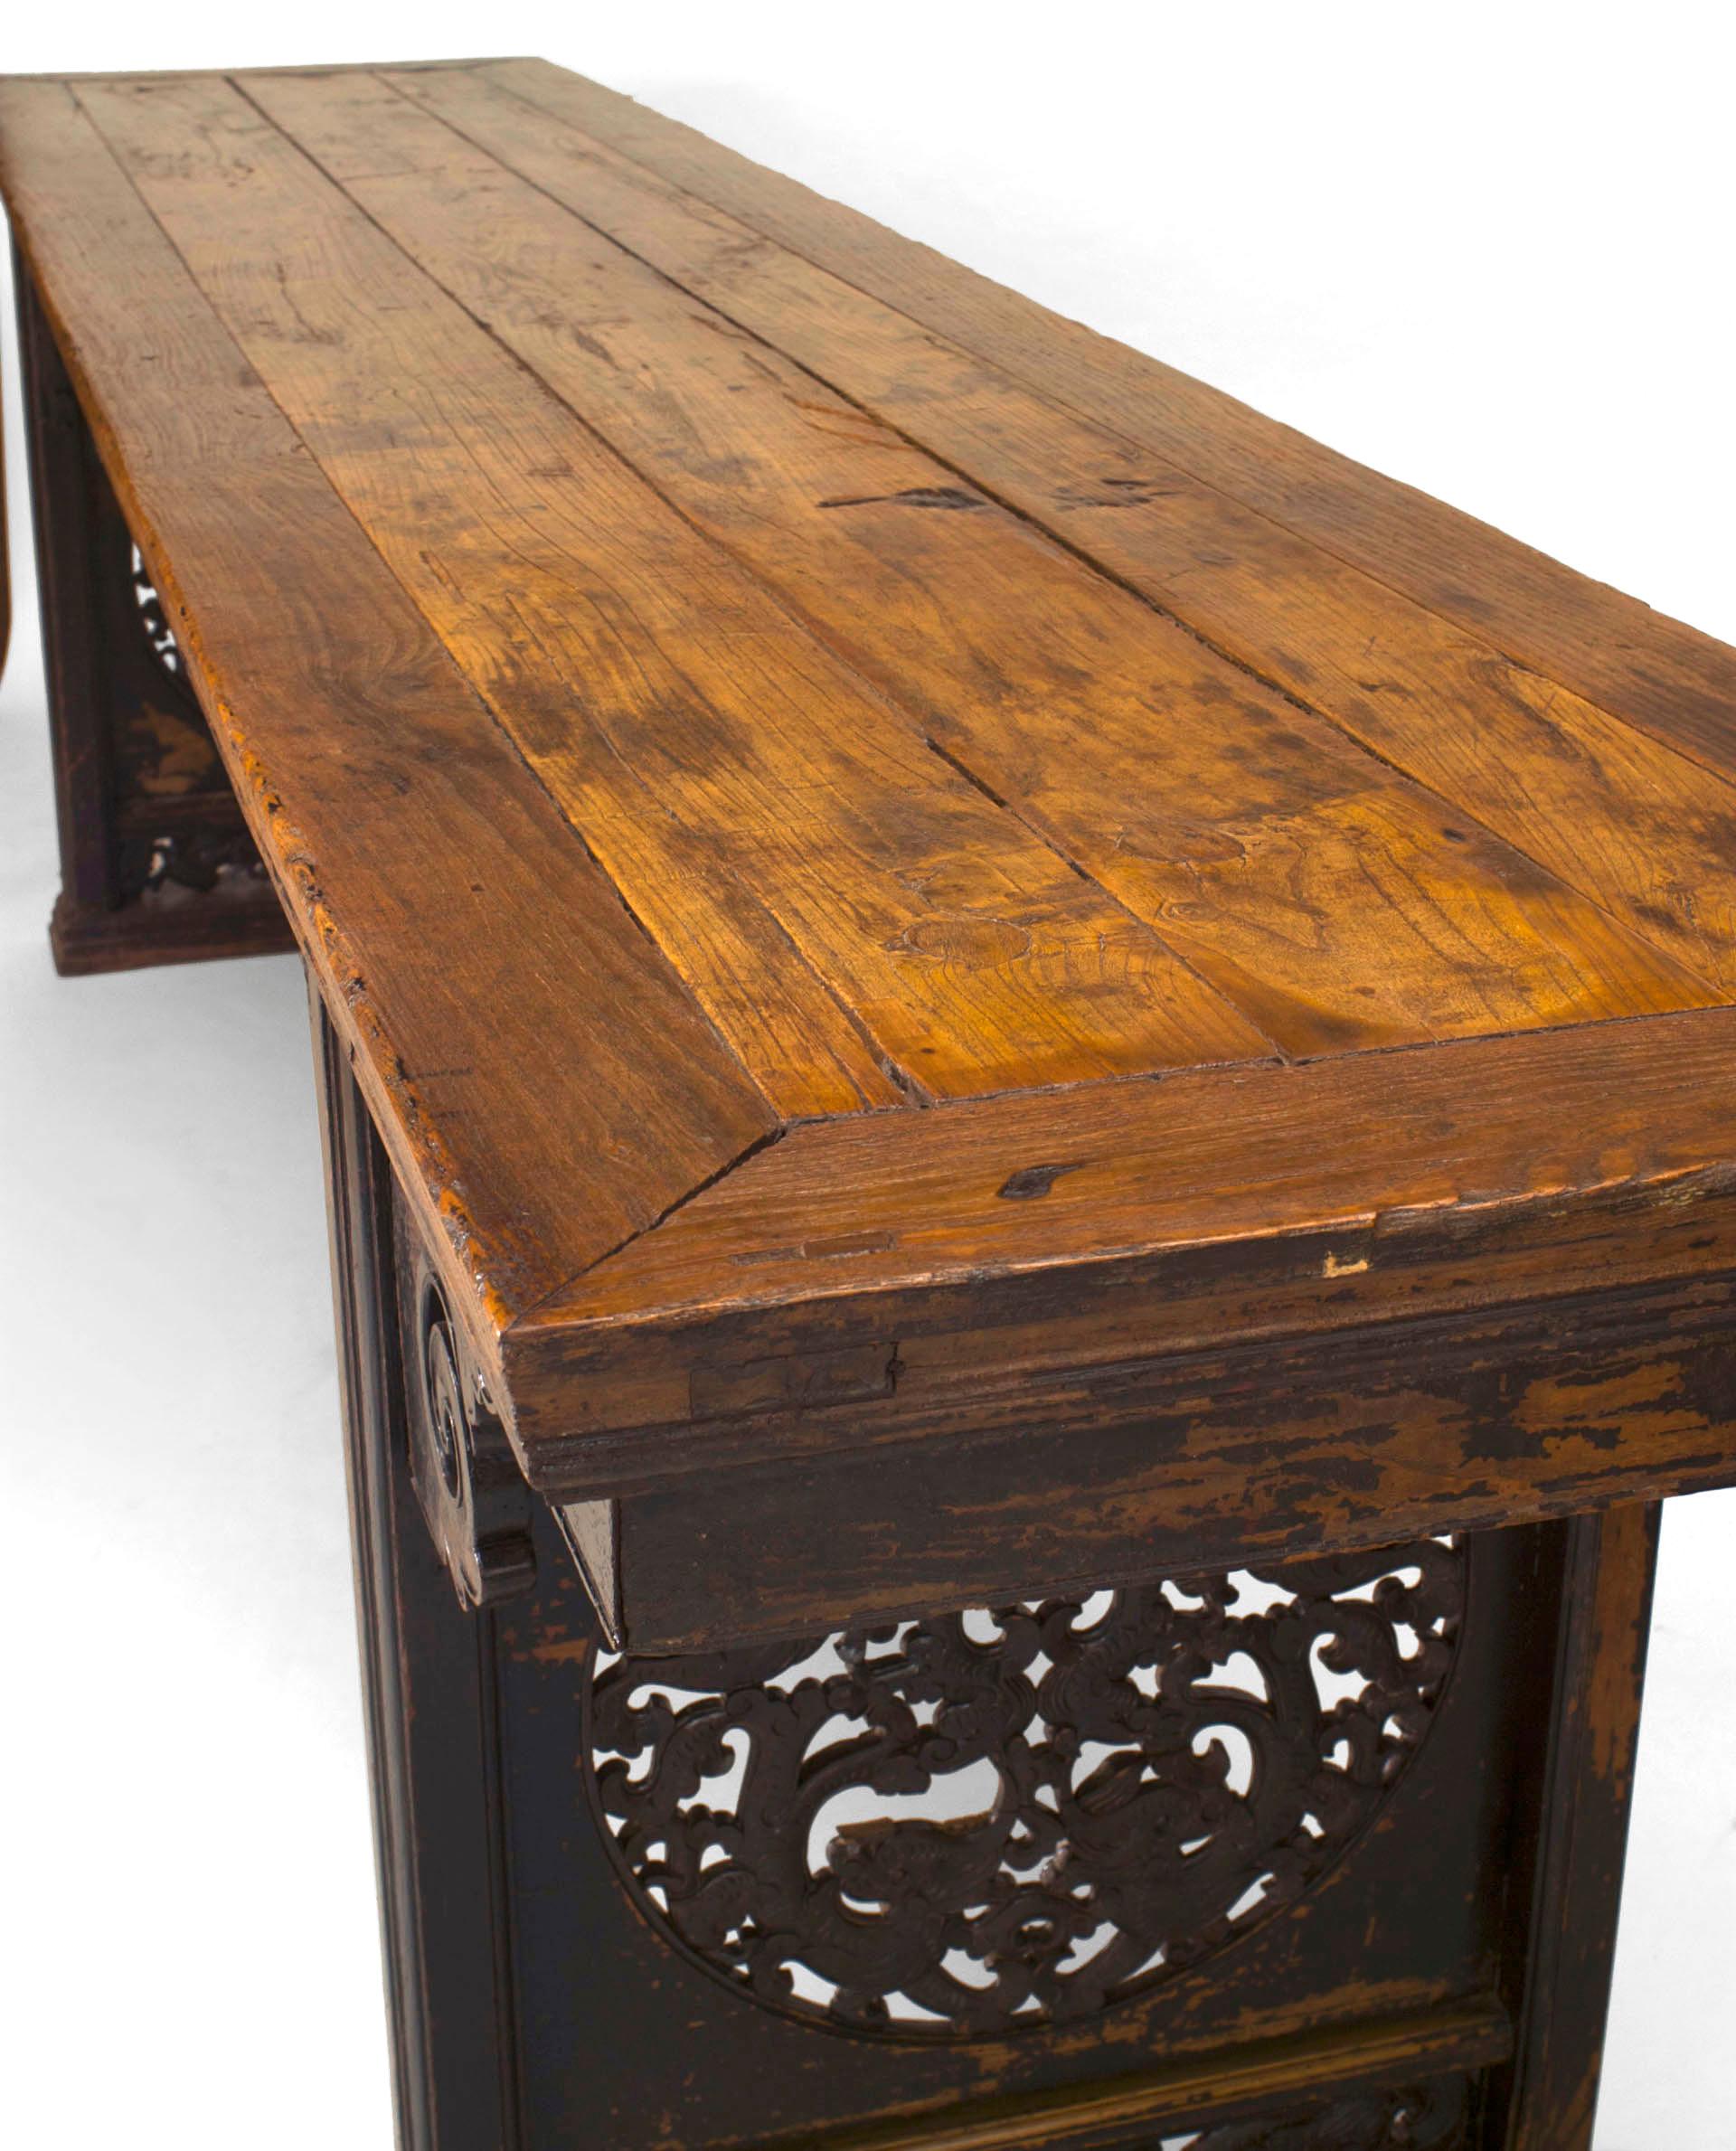 19th century Chinese hardwood altar table with a plank top supported  by side pedestals, each carved with a circular filigree cutout beneath a double scroll design apron.